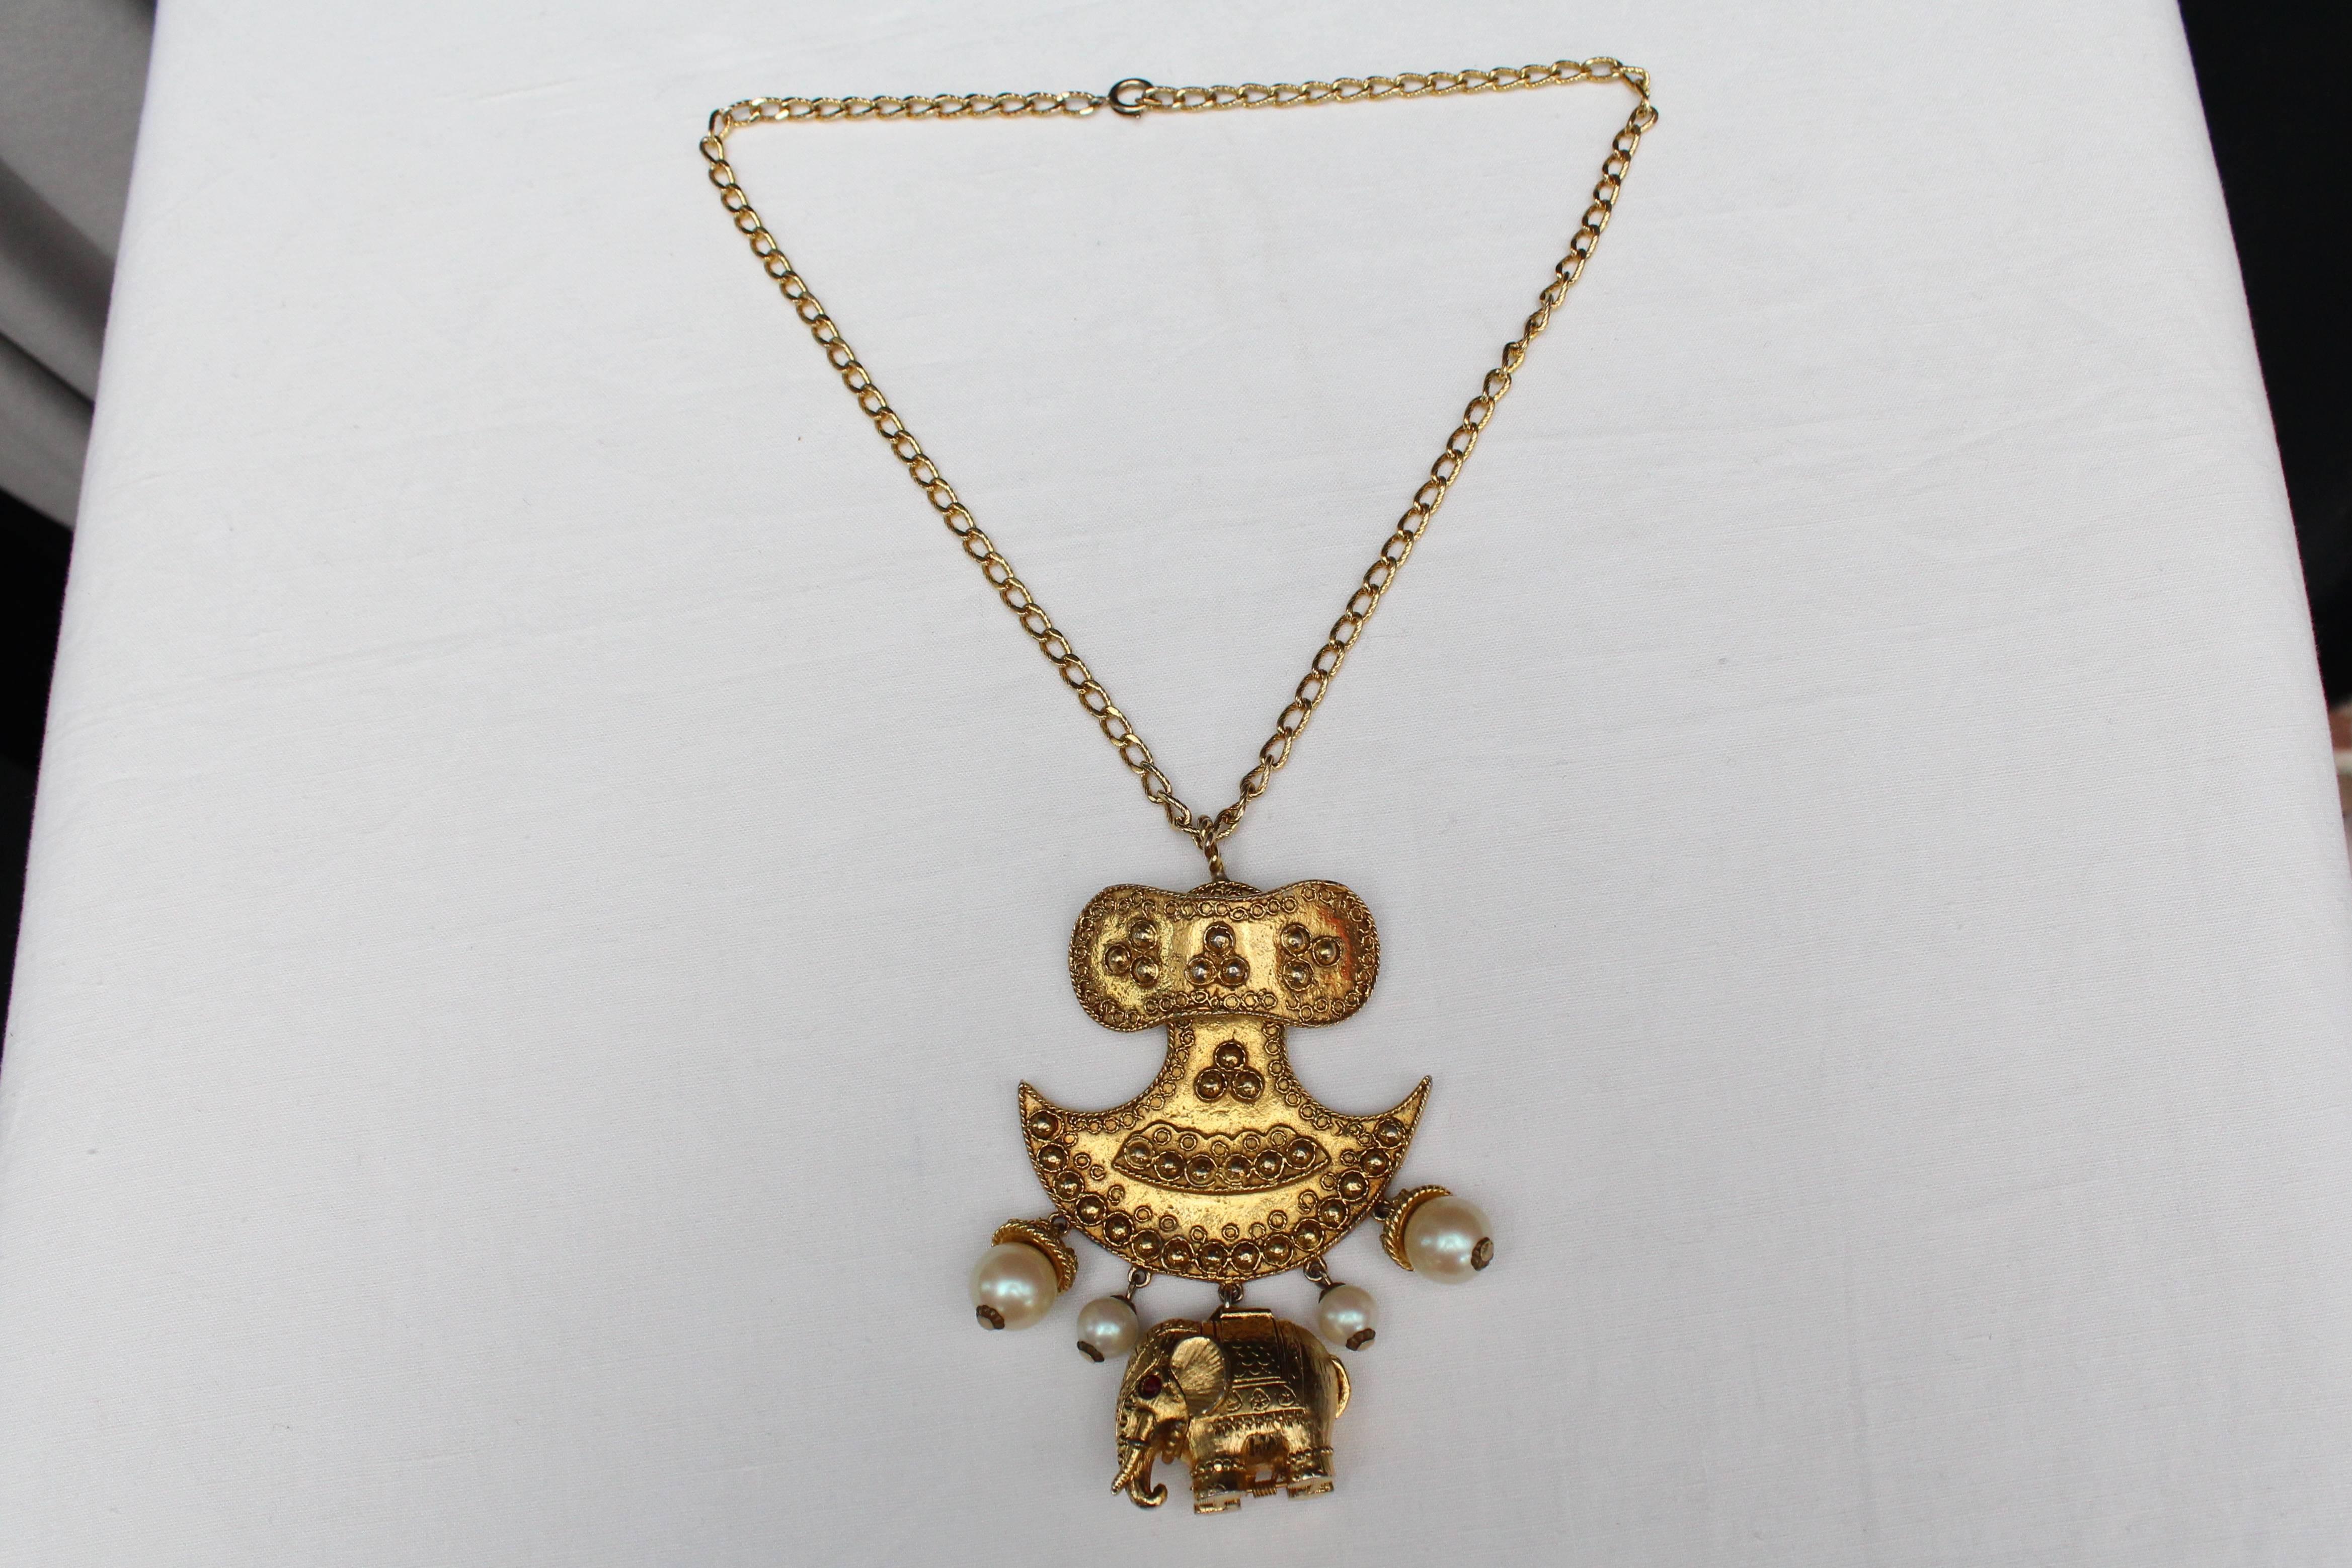 KENNETH LANE gilt metal necklace in a etruscan style composed of a chain holding a large golden metal pendant engraved holding a series of faux-pearls and a gold metal elephant paved with two red rhinestones in the place of the  eyes. 
The elephant